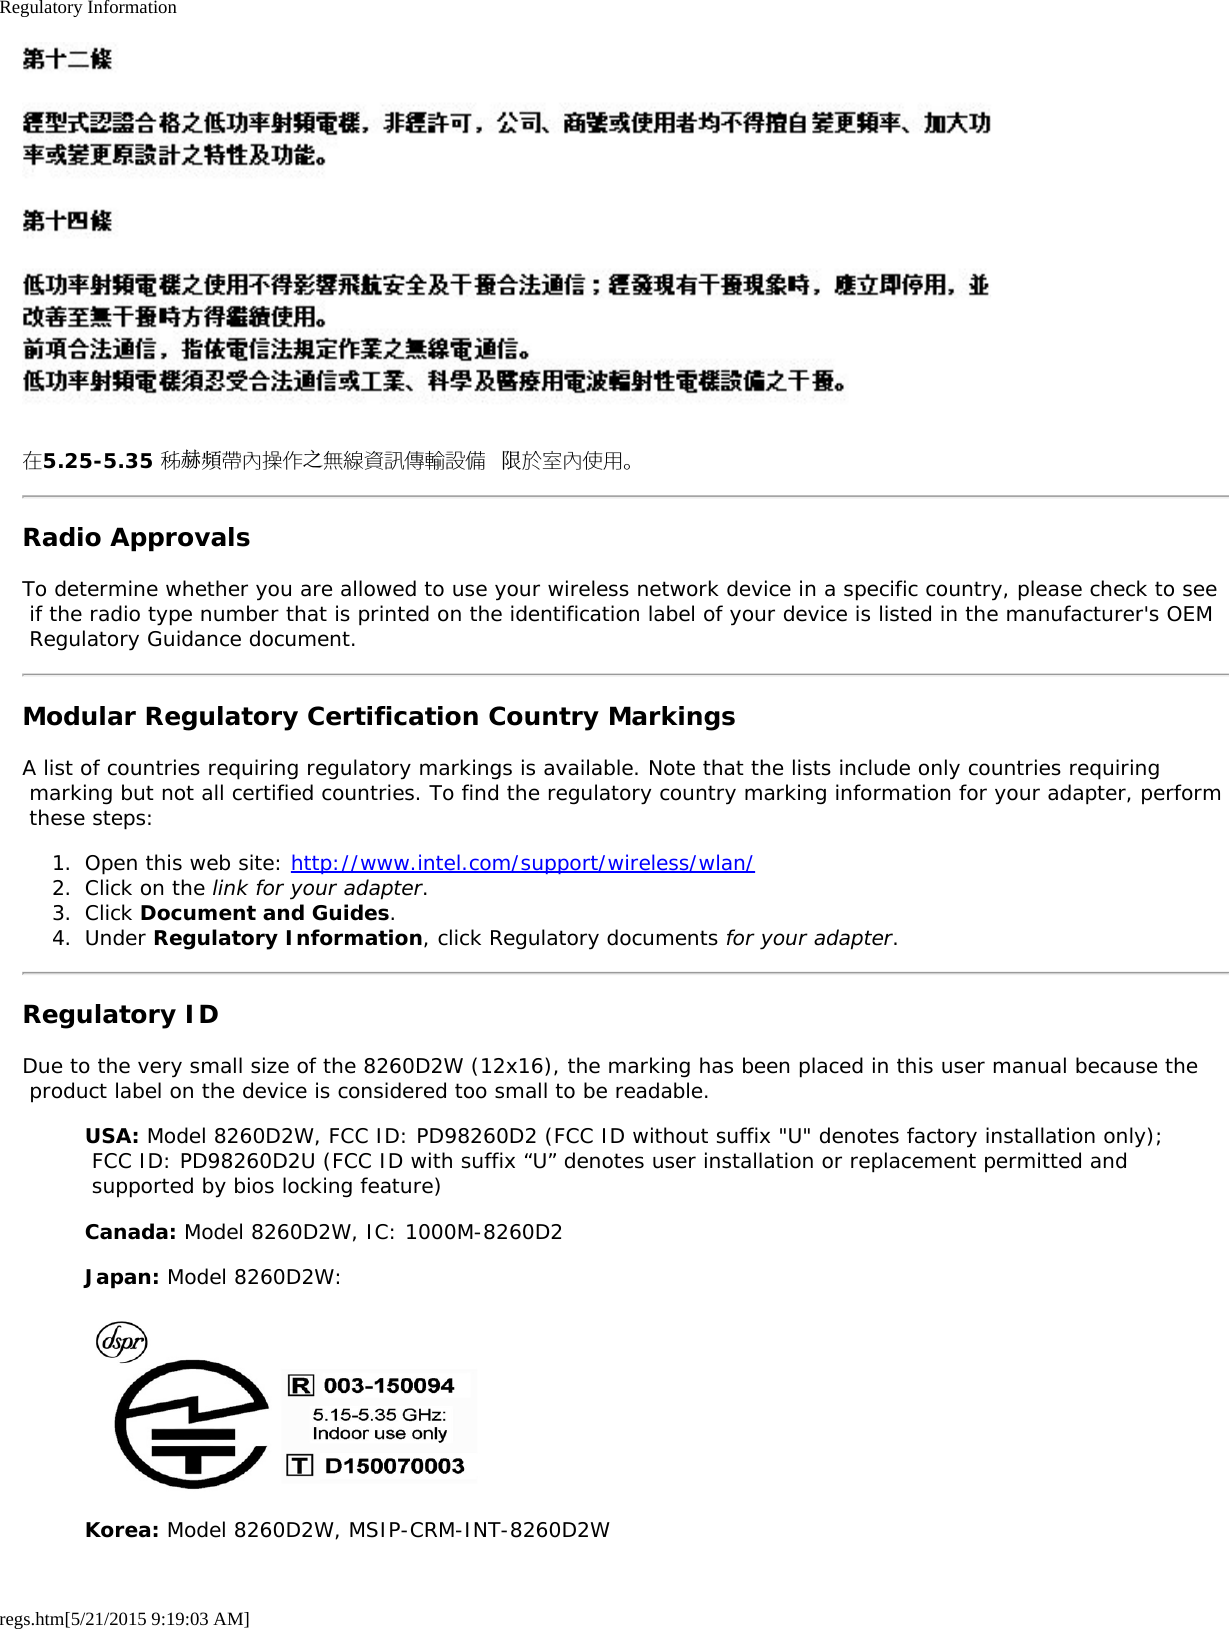 Regulatory Informationregs.htm[5/21/2015 9:19:03 AM]在5.25-5.35 秭赫頻帶內操作之無線資訊傳輸設備 限於室內使用。Radio ApprovalsTo determine whether you are allowed to use your wireless network device in a specific country, please check to see if the radio type number that is printed on the identification label of your device is listed in the manufacturer&apos;s OEM Regulatory Guidance document.Modular Regulatory Certification Country MarkingsA list of countries requiring regulatory markings is available. Note that the lists include only countries requiring marking but not all certified countries. To find the regulatory country marking information for your adapter, perform these steps:1.  Open this web site: http://www.intel.com/support/wireless/wlan/2.  Click on the link for your adapter.3.  Click Document and Guides.4.  Under Regulatory Information, click Regulatory documents for your adapter.Regulatory IDDue to the very small size of the 8260D2W (12x16), the marking has been placed in this user manual because the product label on the device is considered too small to be readable.USA: Model 8260D2W, FCC ID: PD98260D2 (FCC ID without suffix &quot;U&quot; denotes factory installation only); FCC ID: PD98260D2U (FCC ID with suffix “U” denotes user installation or replacement permitted and supported by bios locking feature)Canada: Model 8260D2W, IC: 1000M-8260D2Japan: Model 8260D2W:Korea: Model 8260D2W, MSIP-CRM-INT-8260D2W